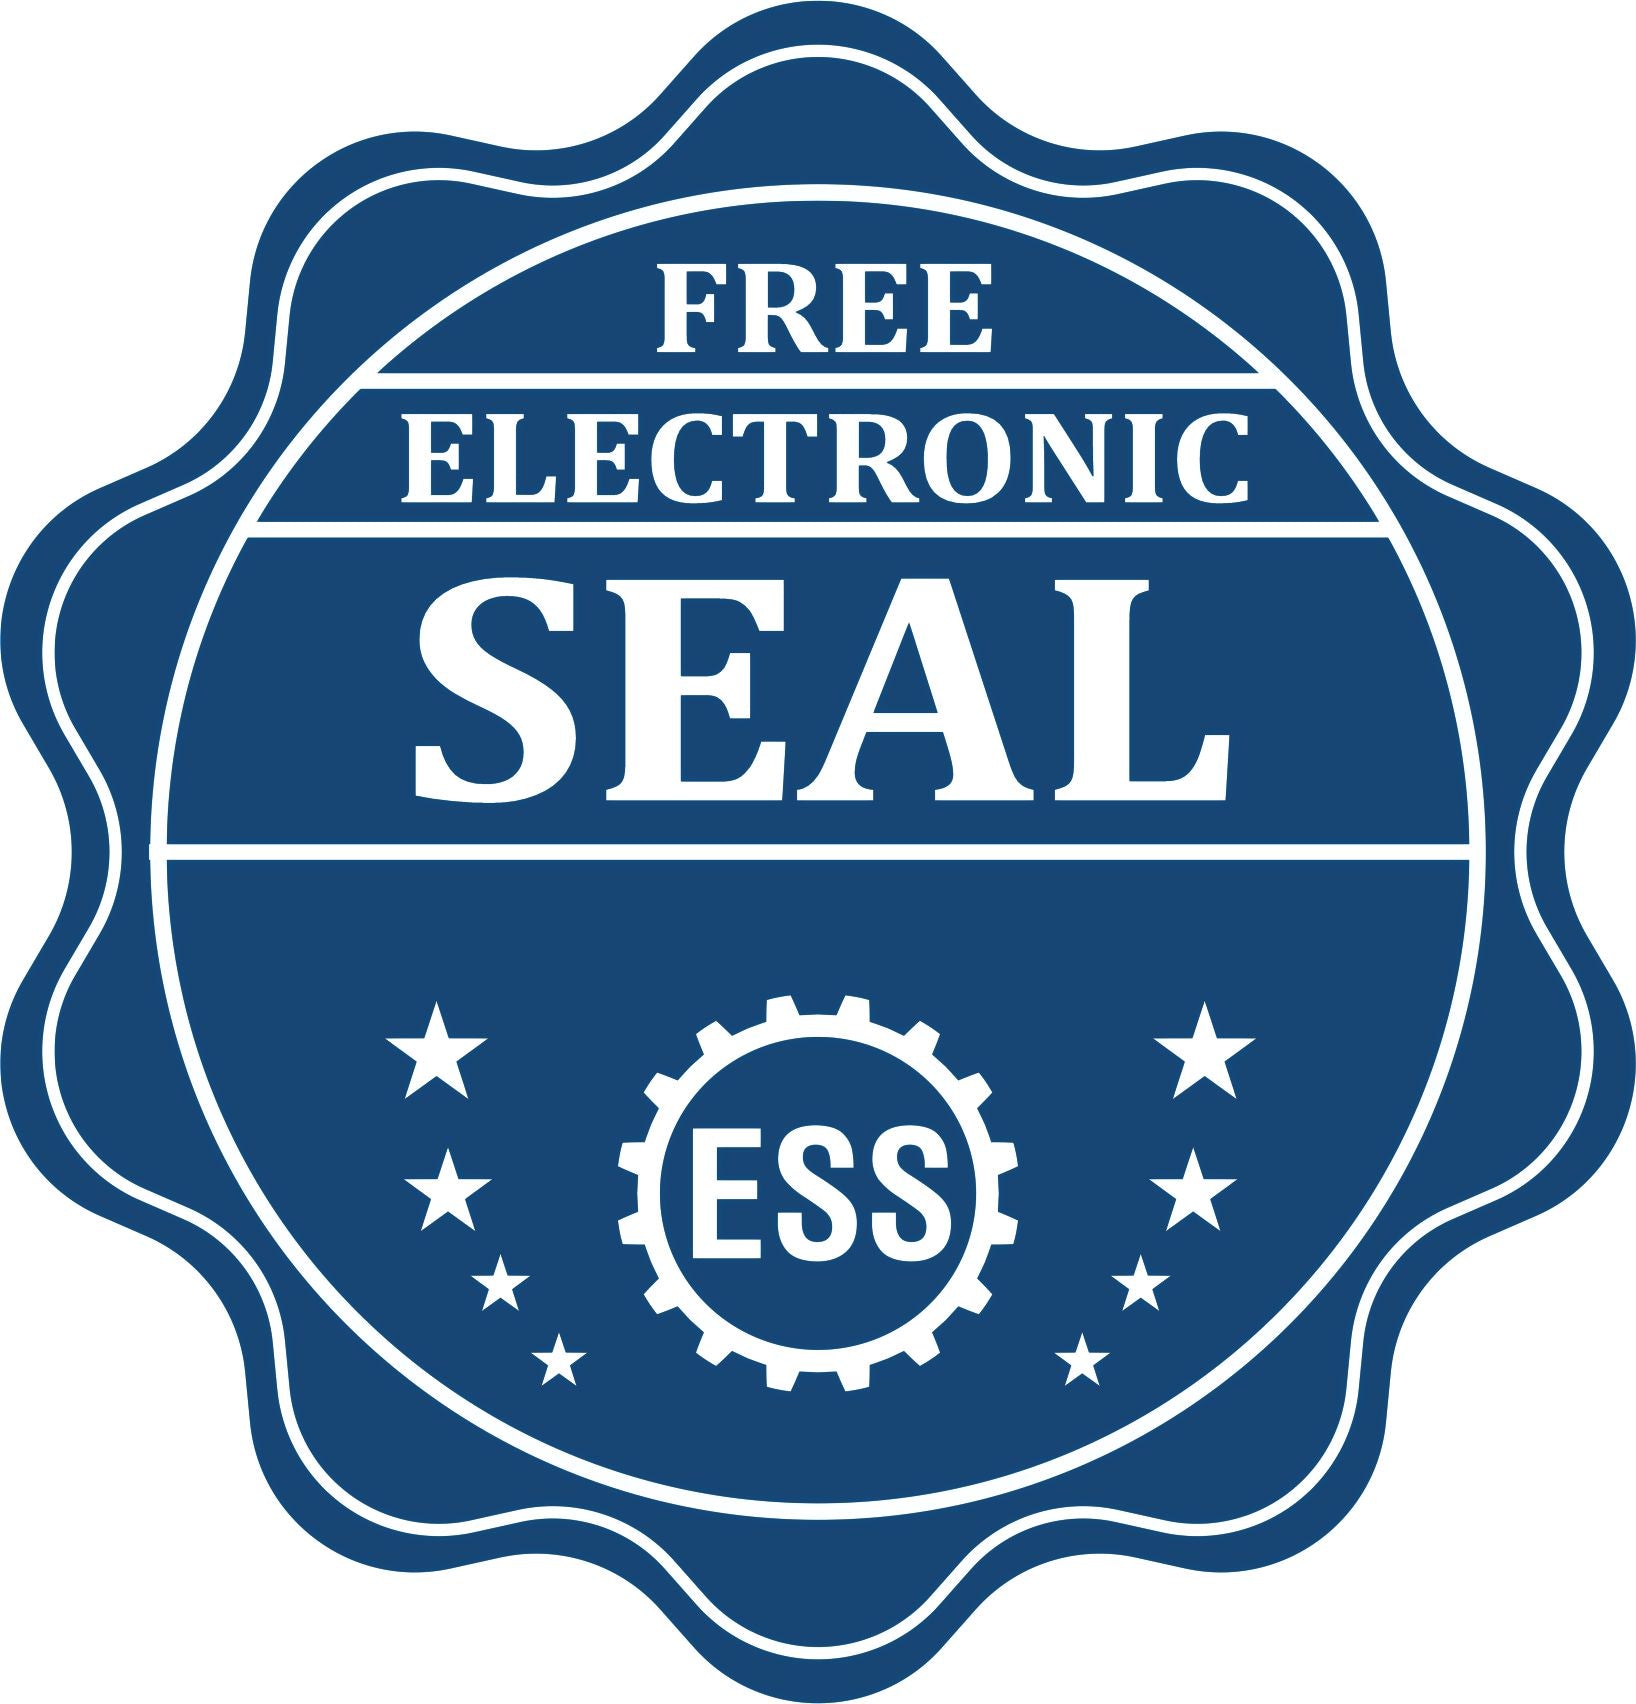 A badge showing a free electronic seal for the Slim Pre-Inked Connecticut Professional Engineer Seal Stamp with stars and the ESS gear on the emblem.